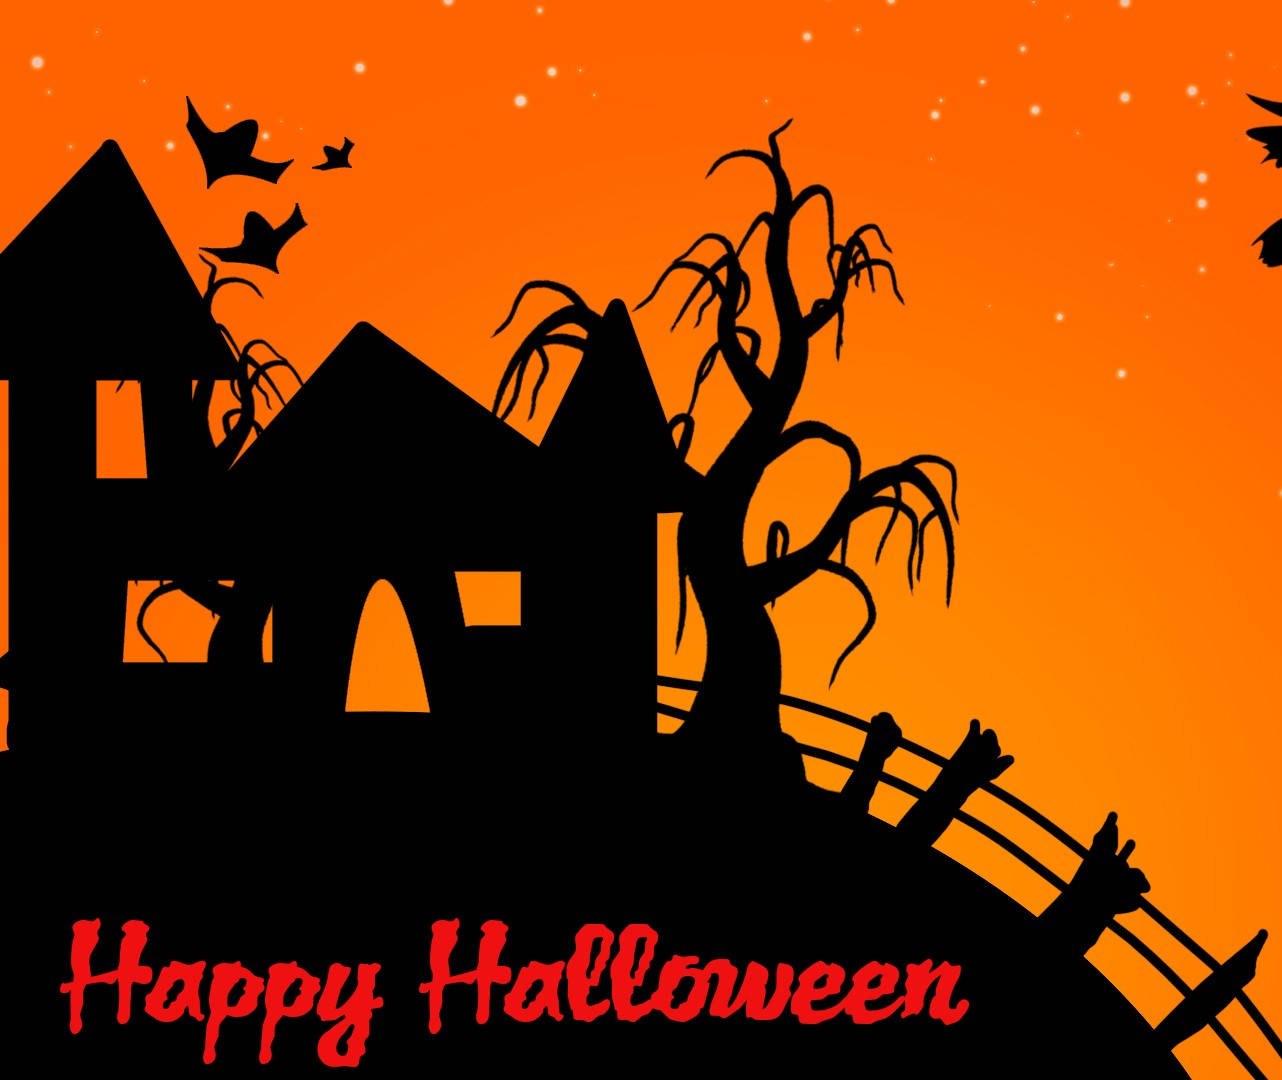 Spooky Surprises Await You This Halloween! Background